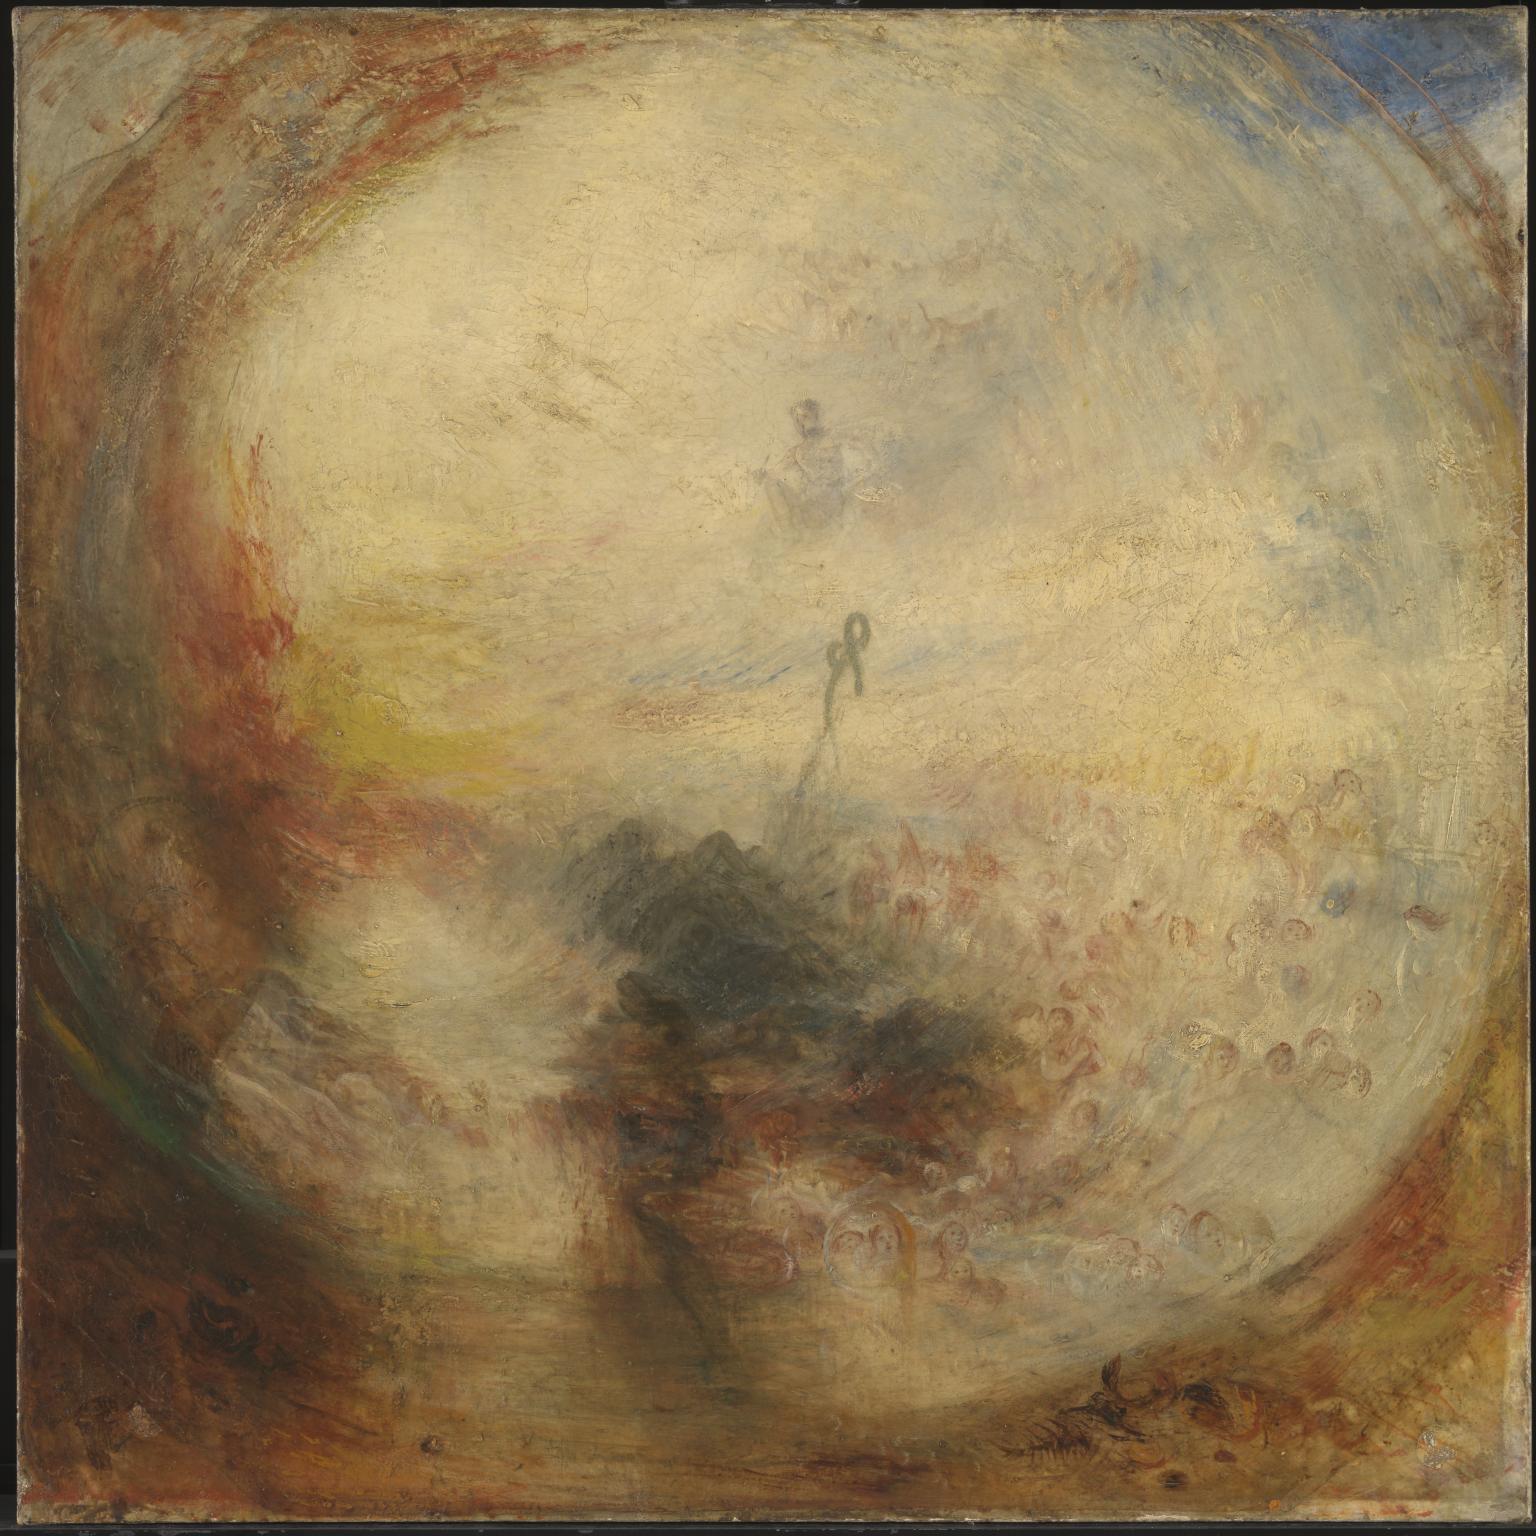 Light and Colour (Goethe's Theory) - the Morning after the Deluge - Moses Writing the Book of Genesis exhibited 1843 by Joseph Mallord William Turner 1775-1851